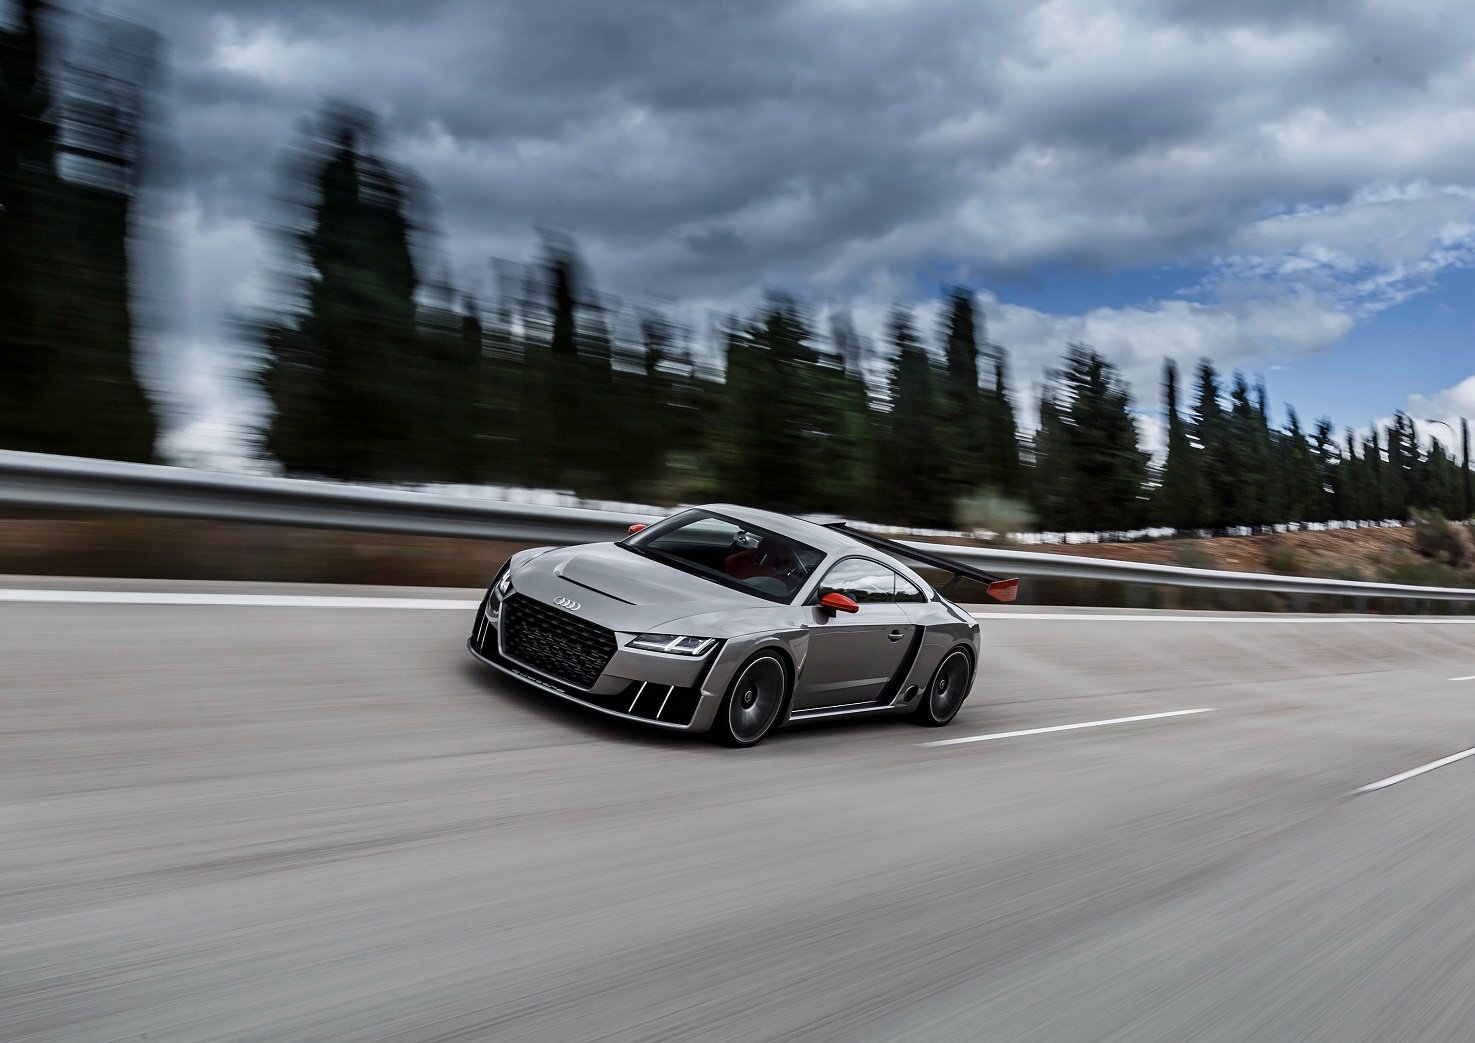 2015, Audi, Cars, Clubsport, Concept, Supercars, Turbo Wallpaper